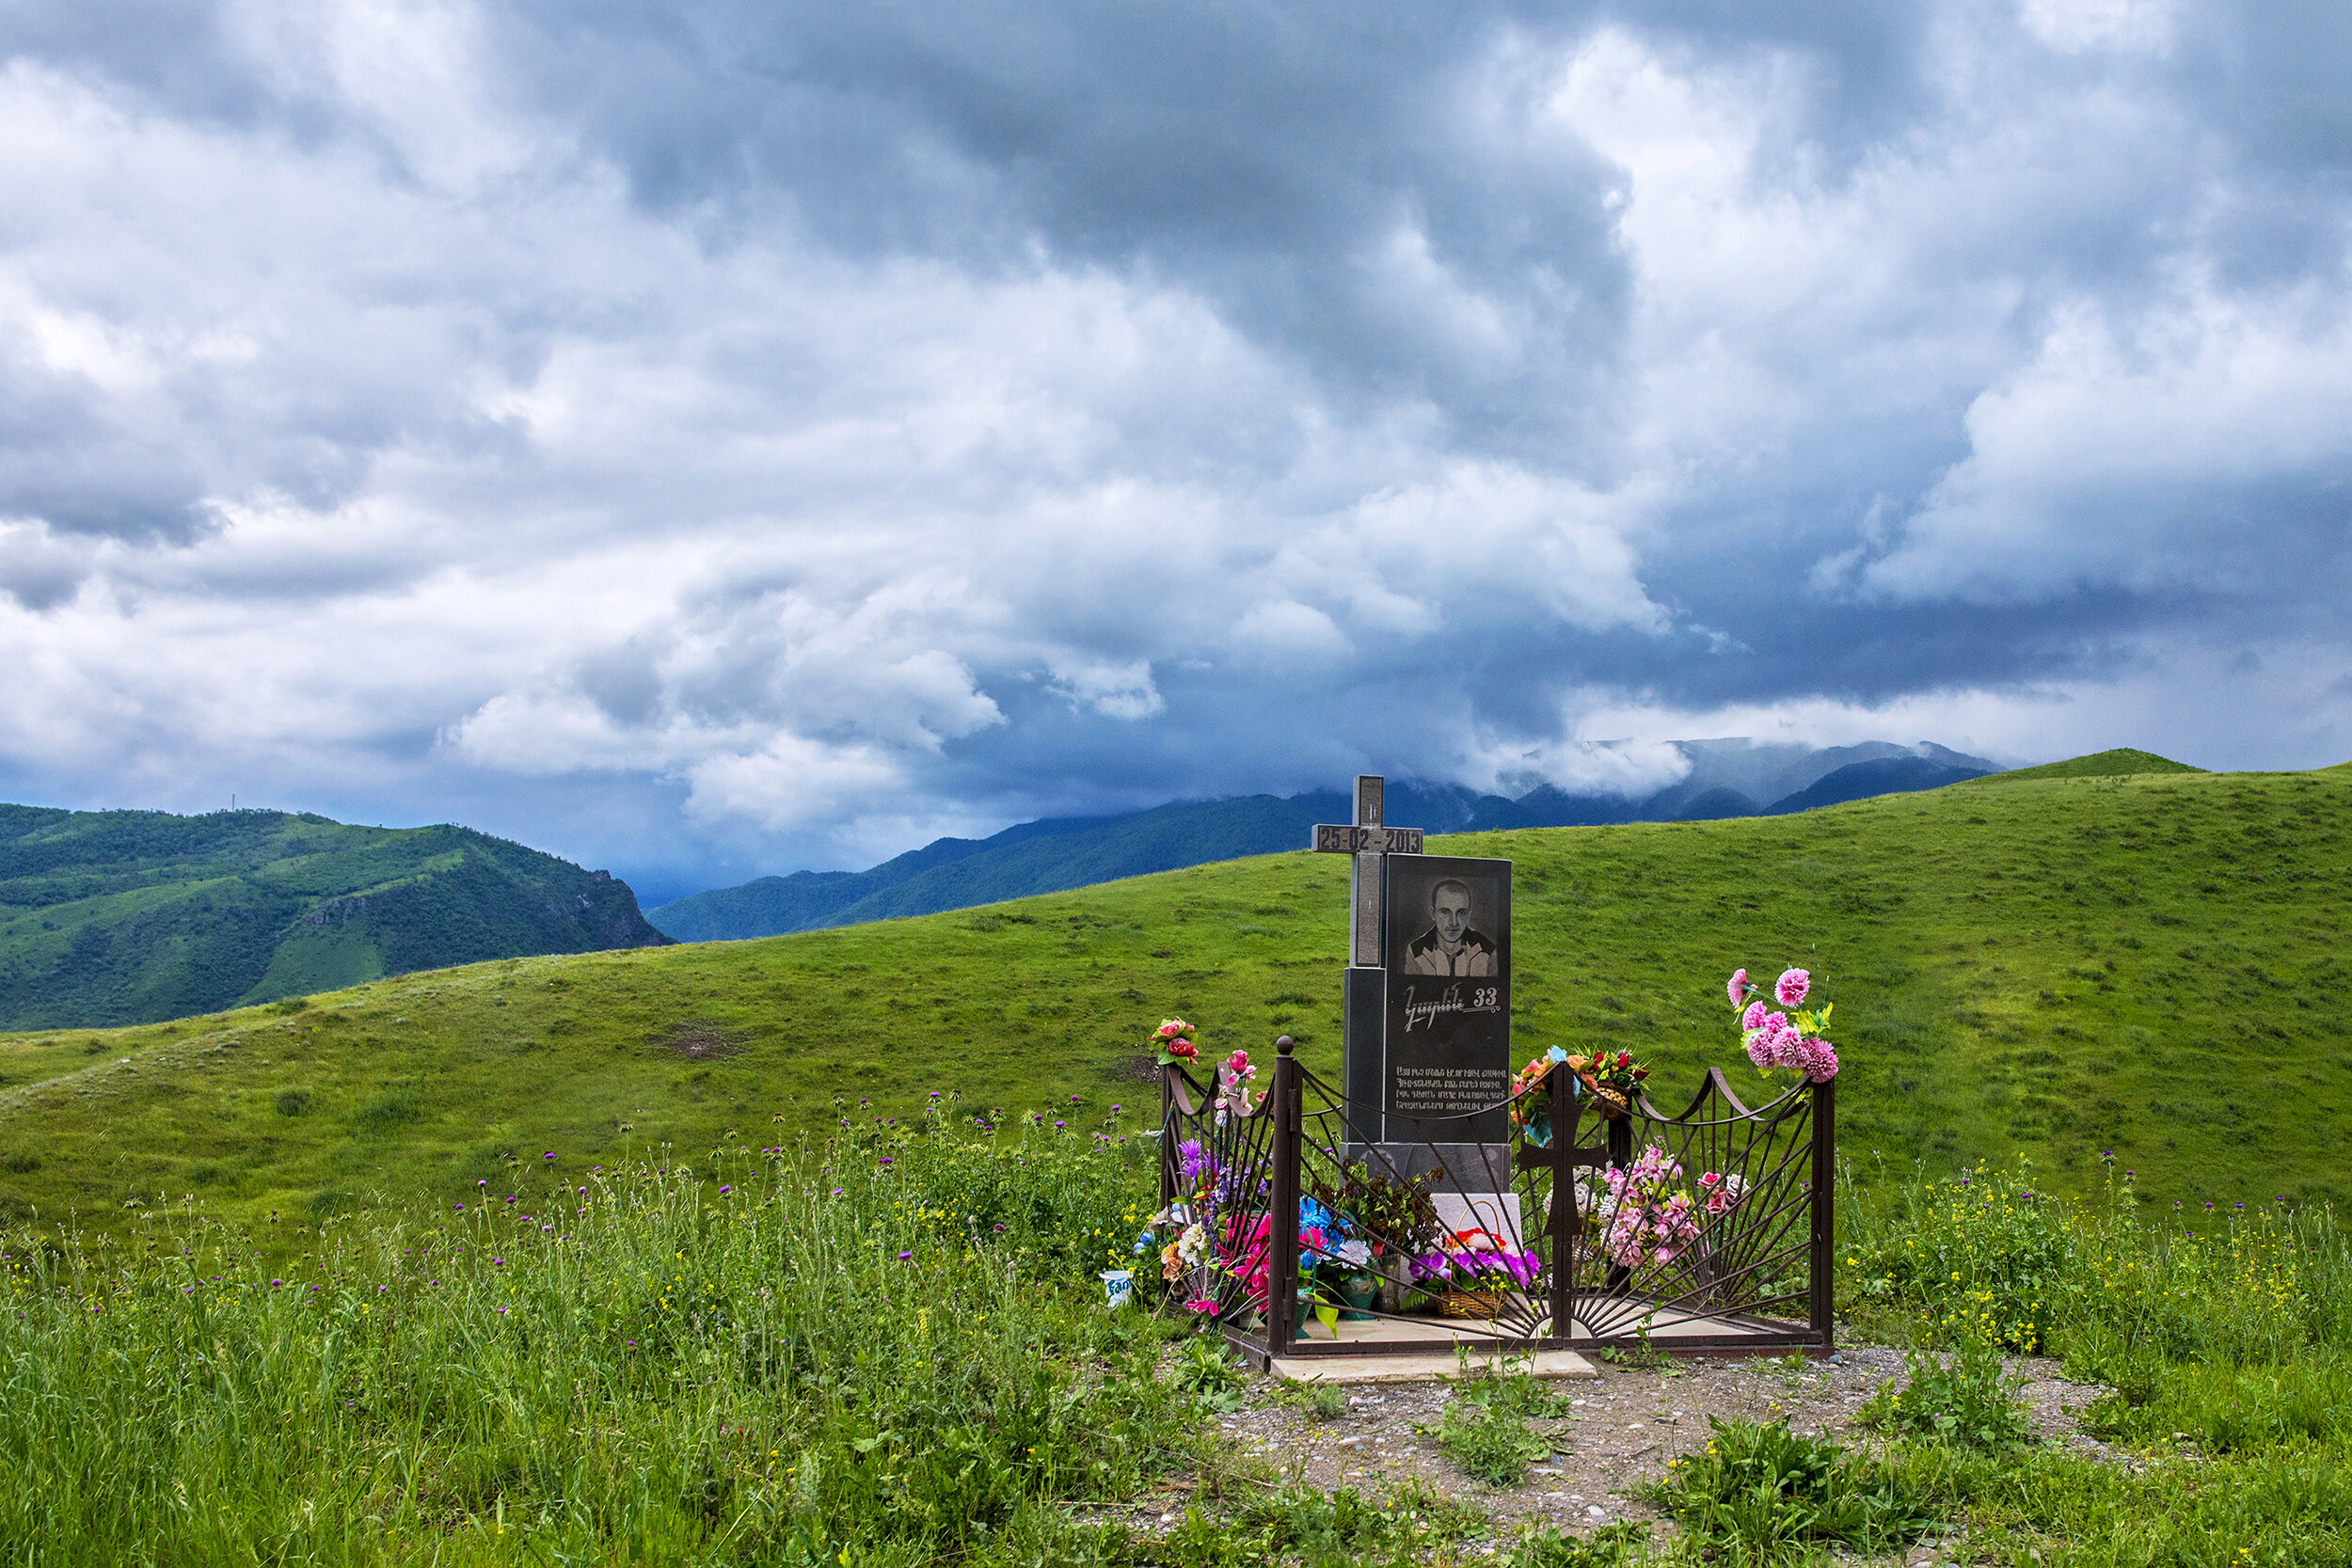  Near the Line of Contact in Mataghis, Nagorno-Karabakh, a memorial reads:    The mist that settled on my path  brought me eternal sleep,  and the cruel death laid hold of me,  leaving my dreams unfulfilled. 